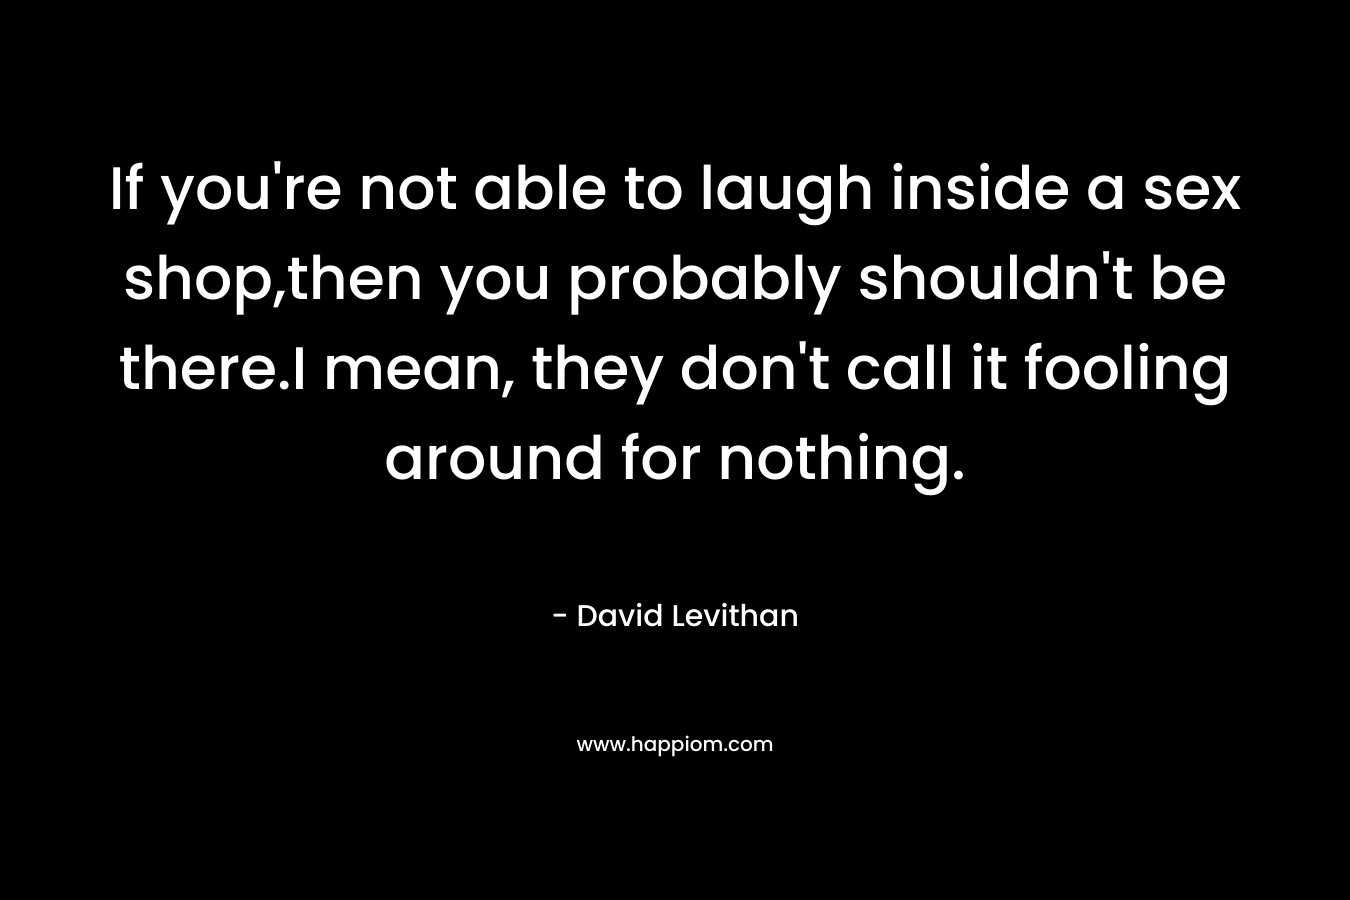 If you’re not able to laugh inside a sex shop,then you probably shouldn’t be there.I mean, they don’t call it fooling around for nothing. – David Levithan